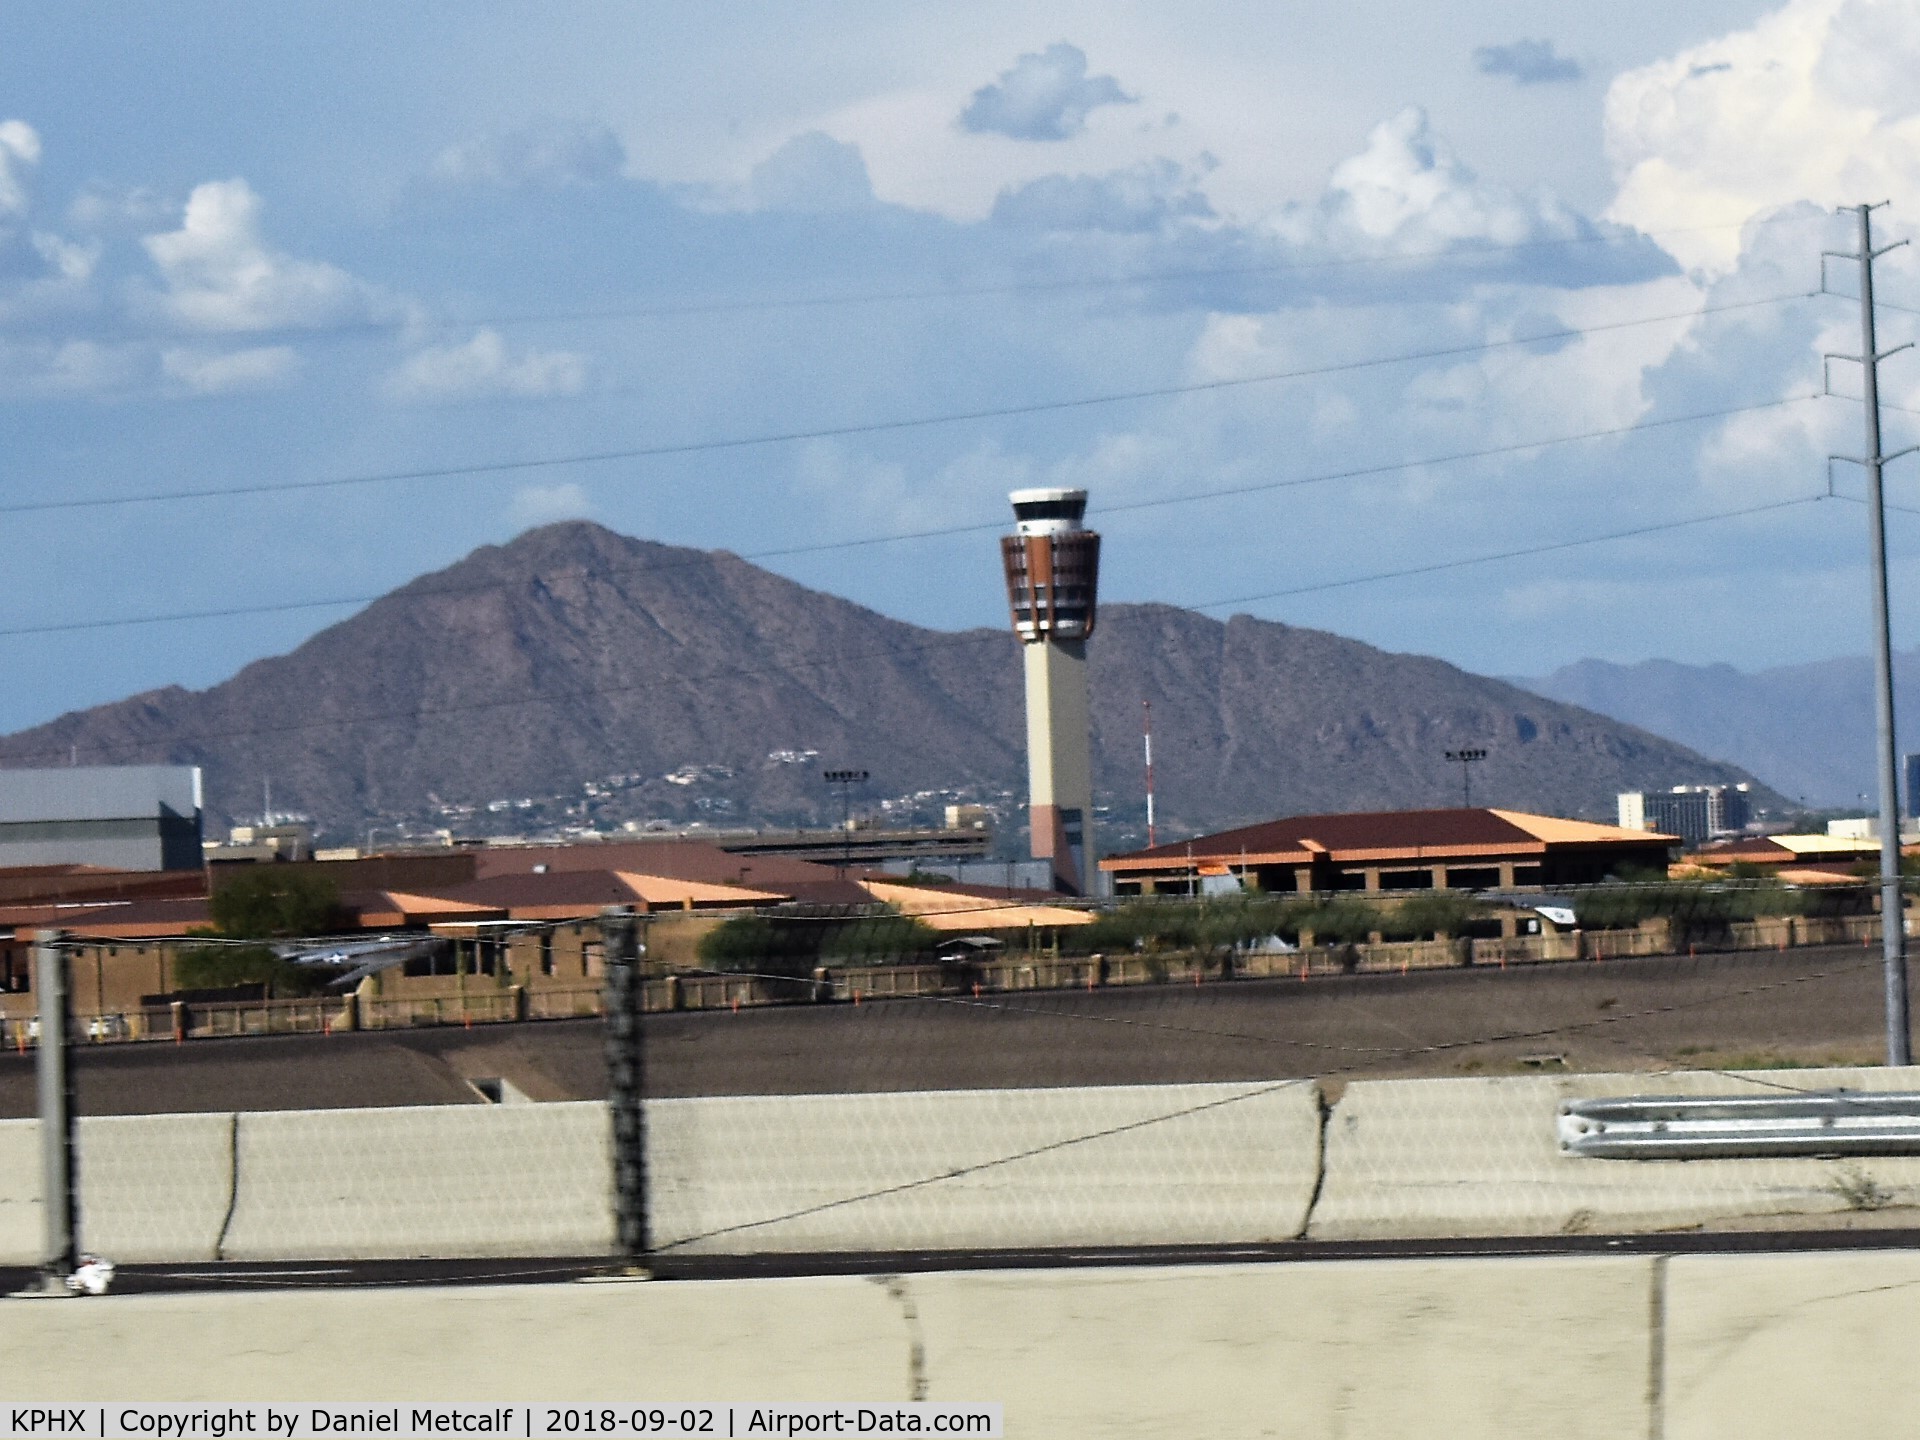 Phoenix Sky Harbor International Airport (PHX) - A view of the Phoenix Sky Harbor International Airport from the I-10